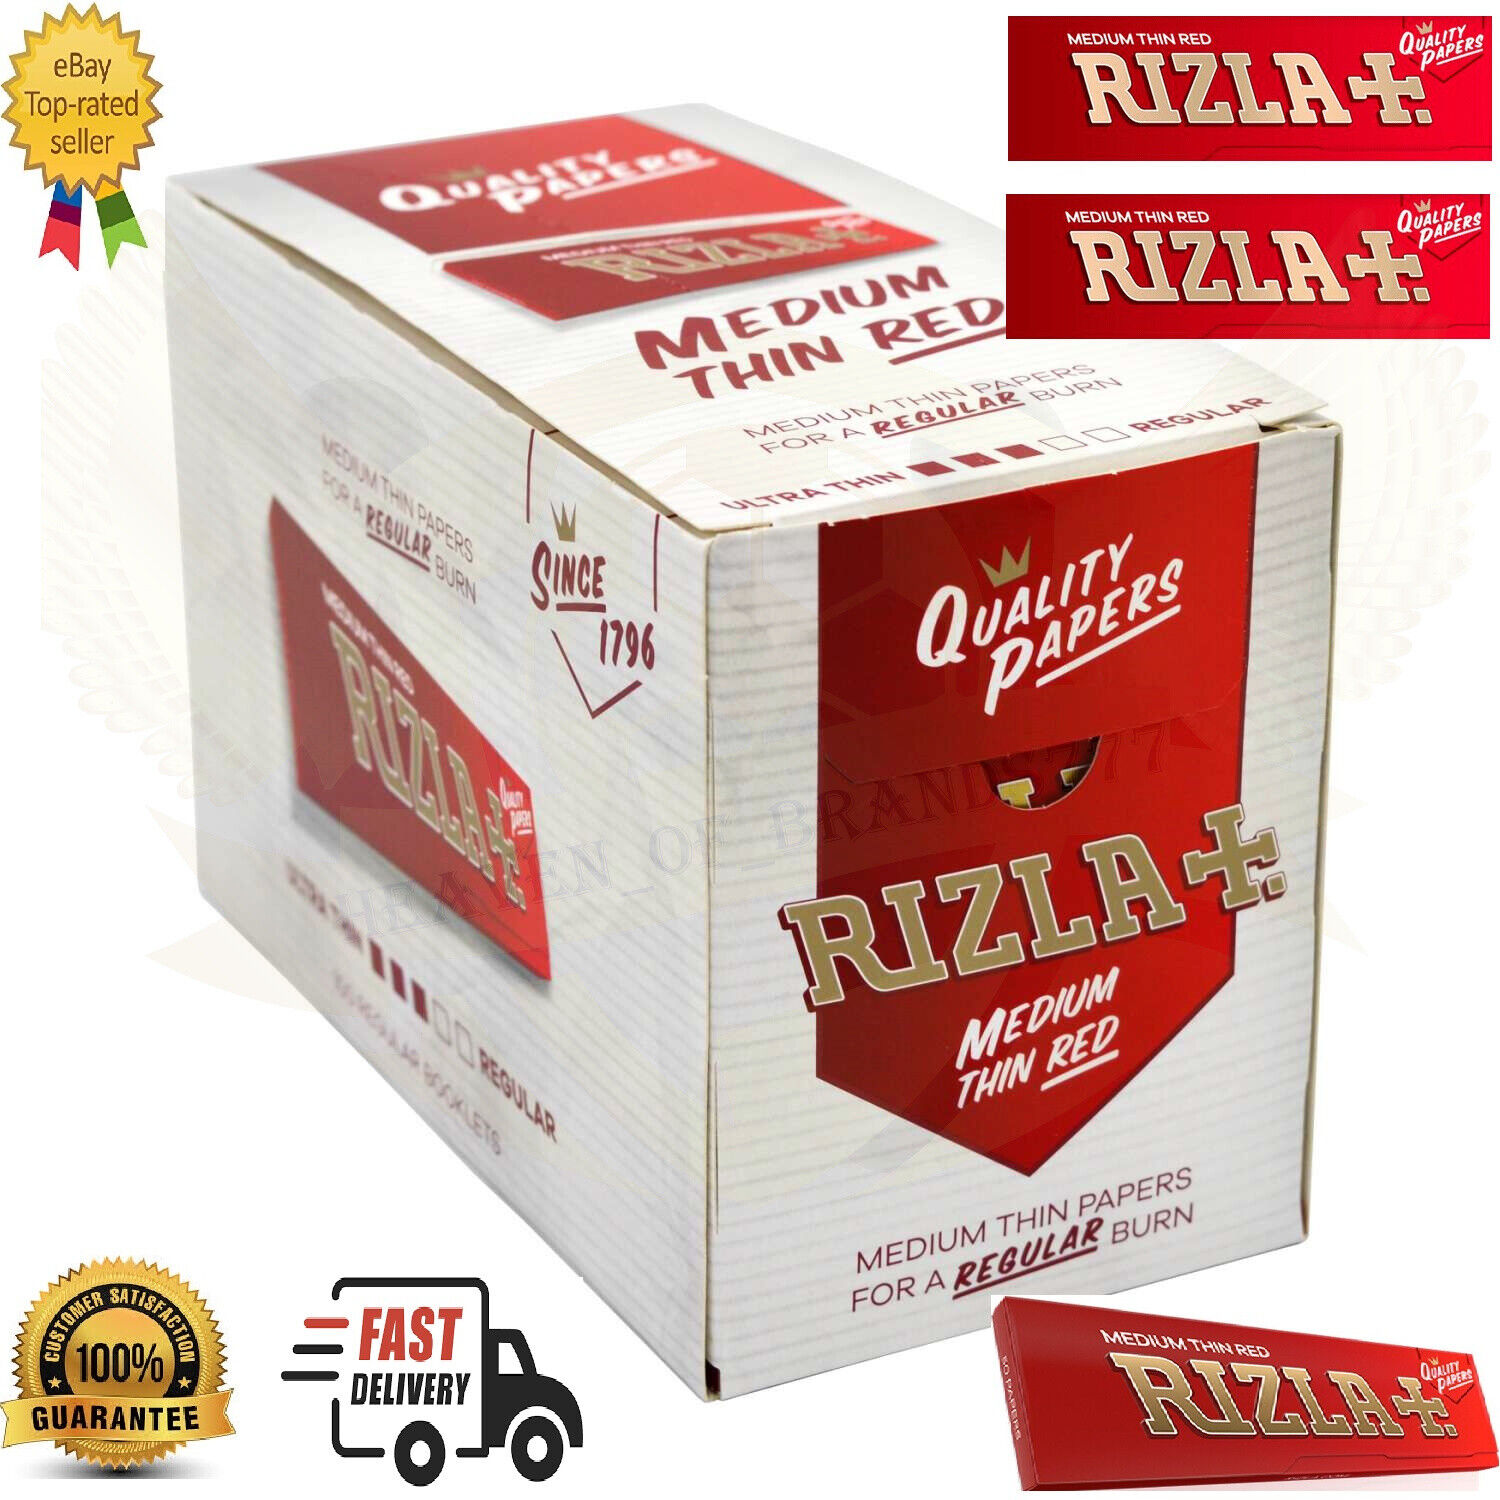 Rizla RED Regular Size Cigarette Rolling Papers 25 x Booklets - 1250 Leaves